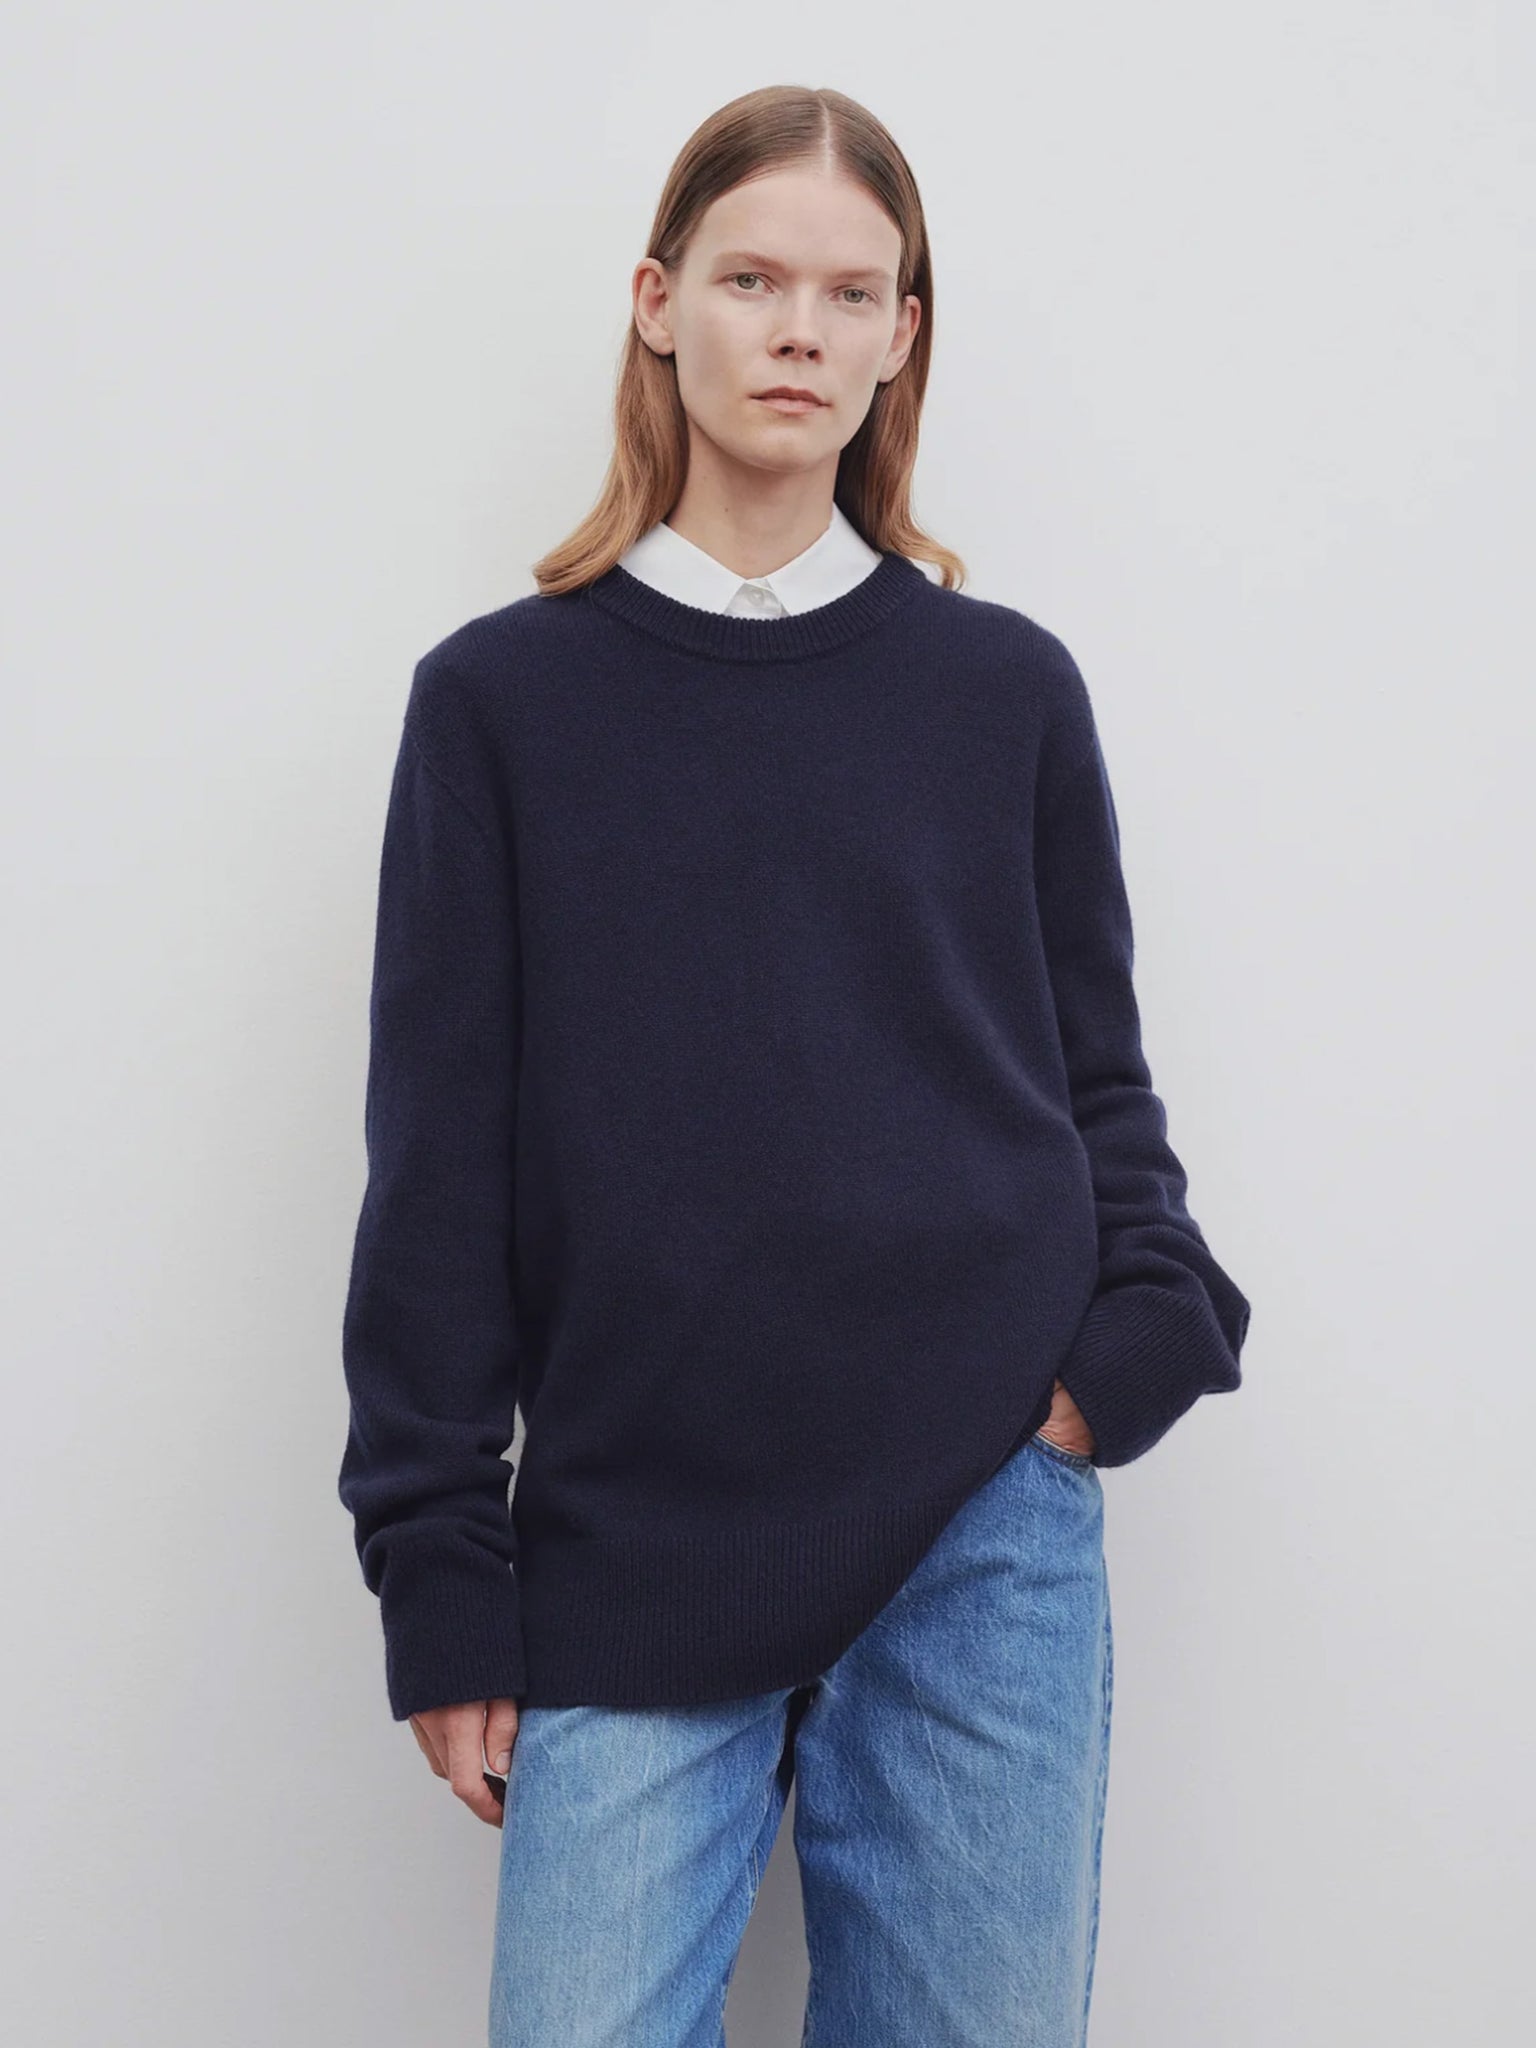 Sibem Cashmere Wool Sweater Navy